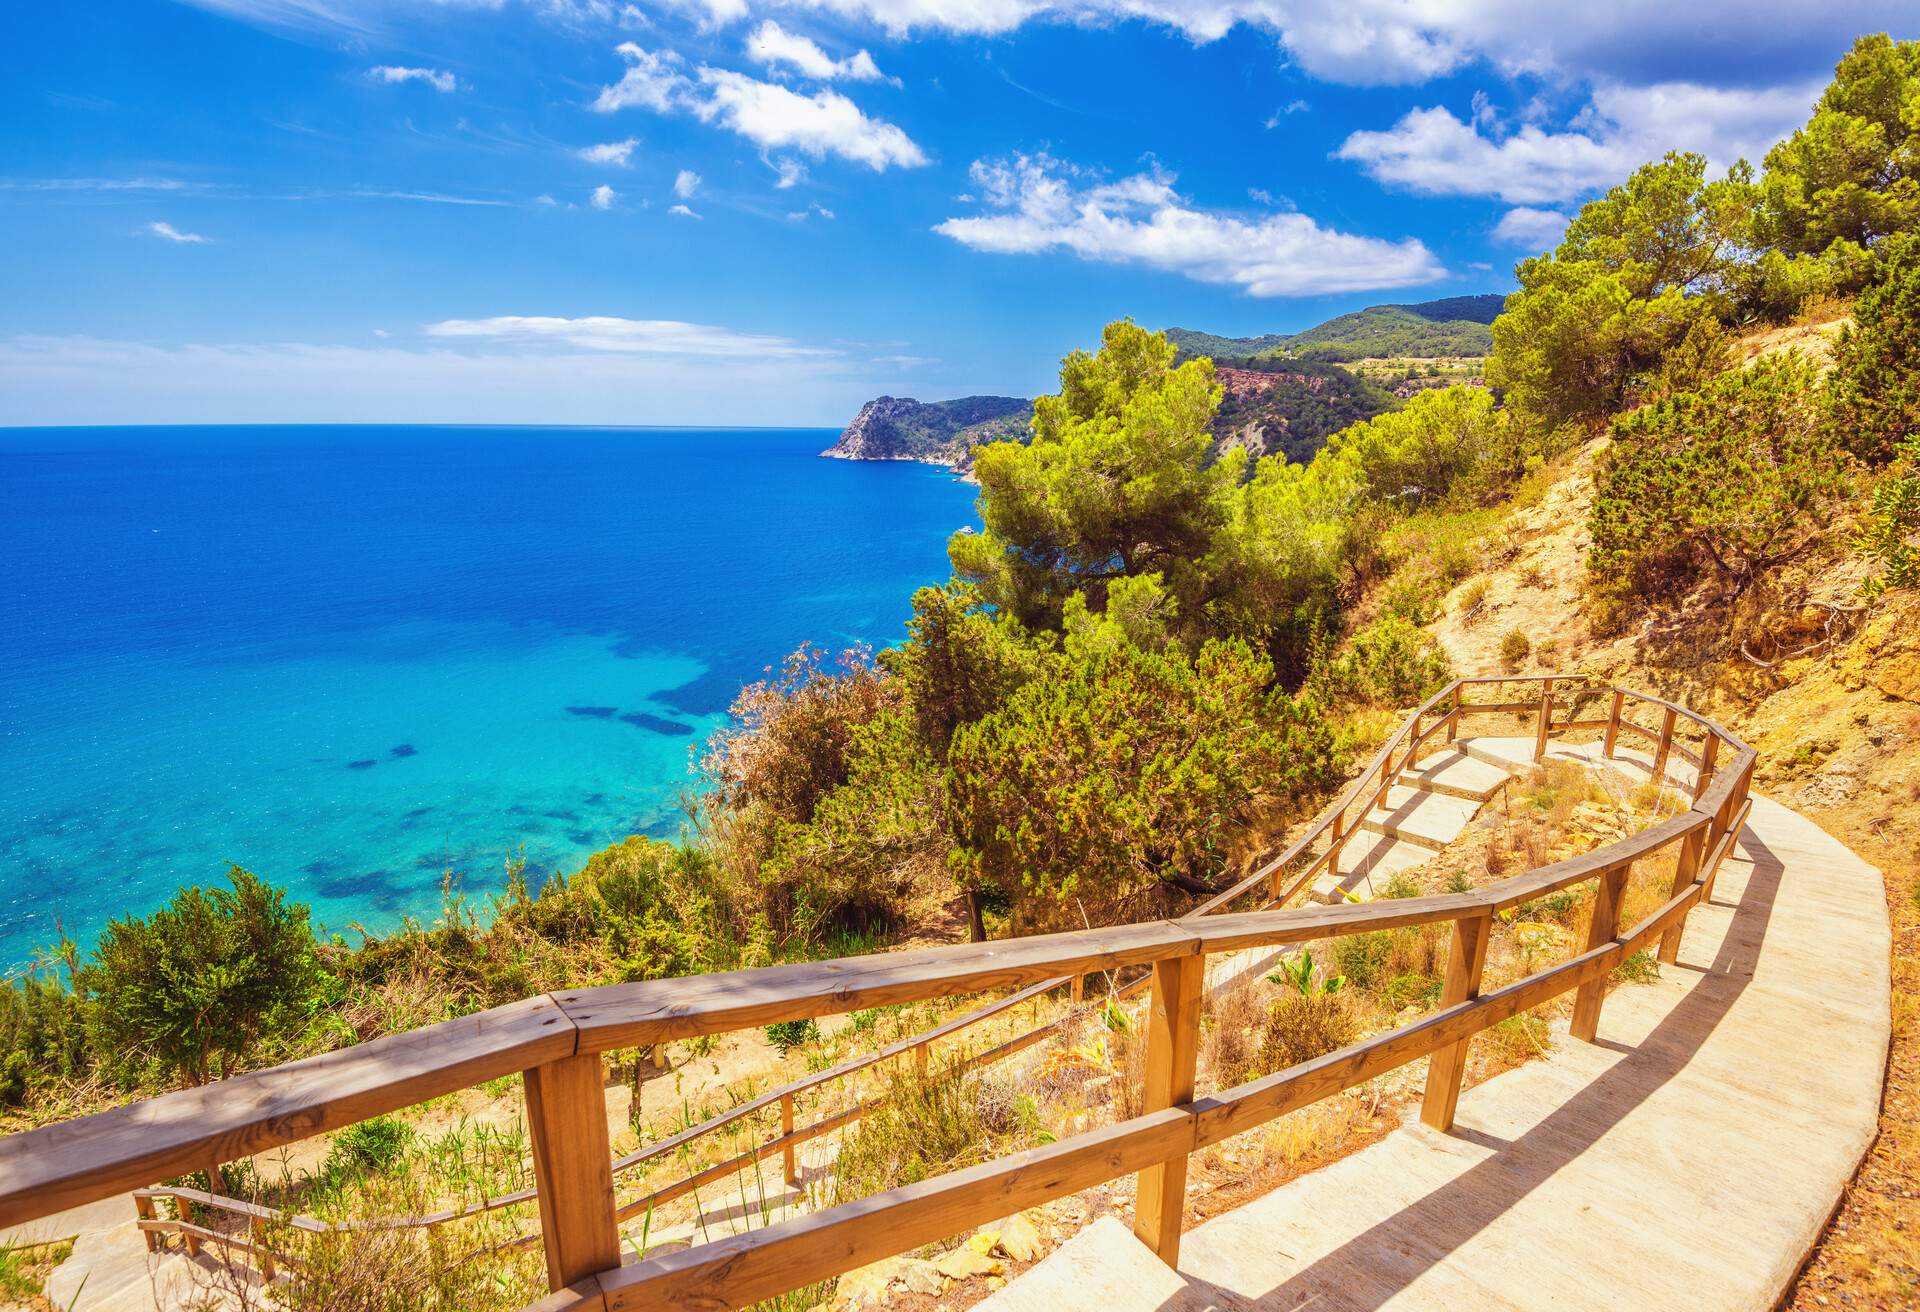 Walk down to the beautiful beach of Cala des Cubells overlooking the coastline.